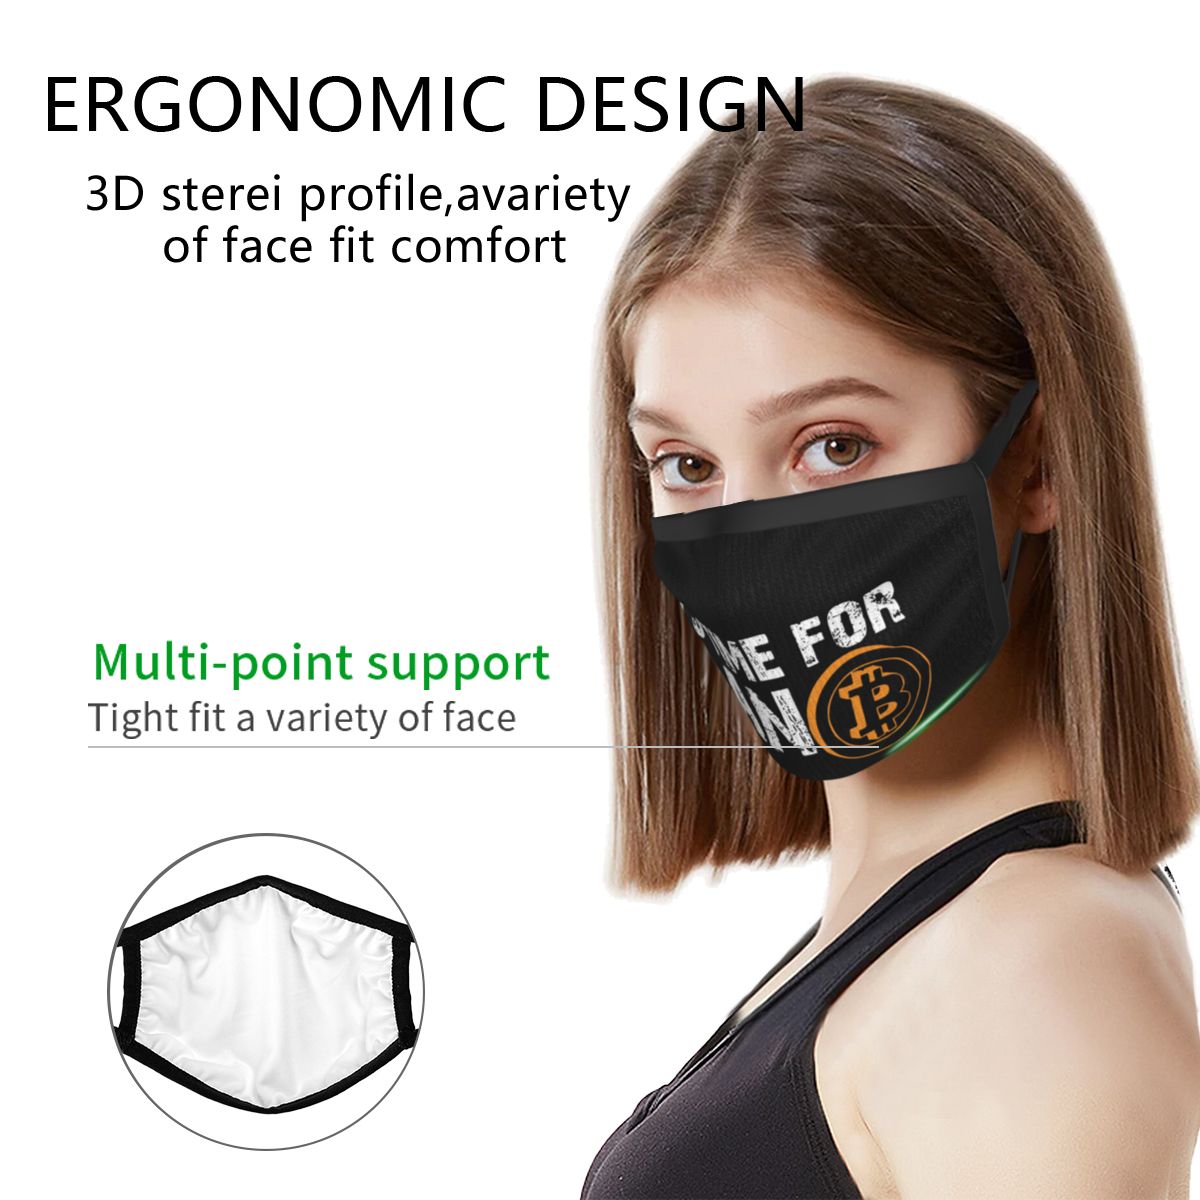 It's Time For Plan B Bitcoin face mask